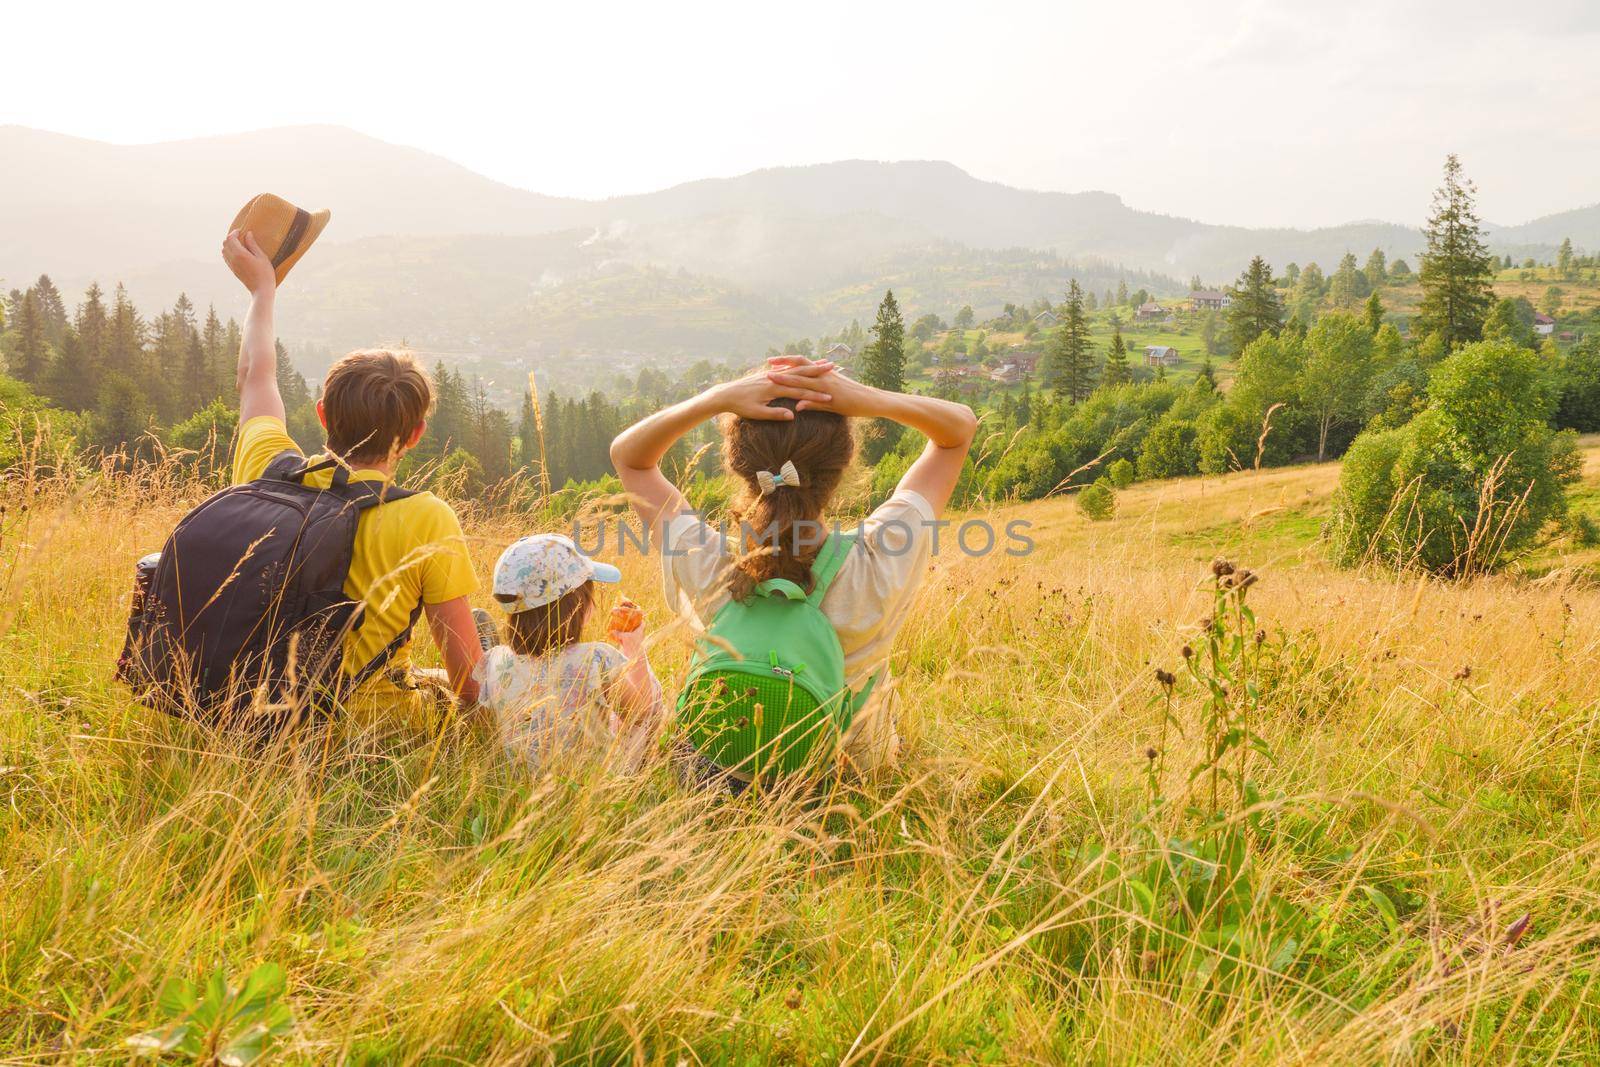 Waving hello. Green travel family nature. Happy family mountain vacation time together travel lifestyle nature. Tourists hiking family lifestyle vacation holiday summer travel local trekking mountains